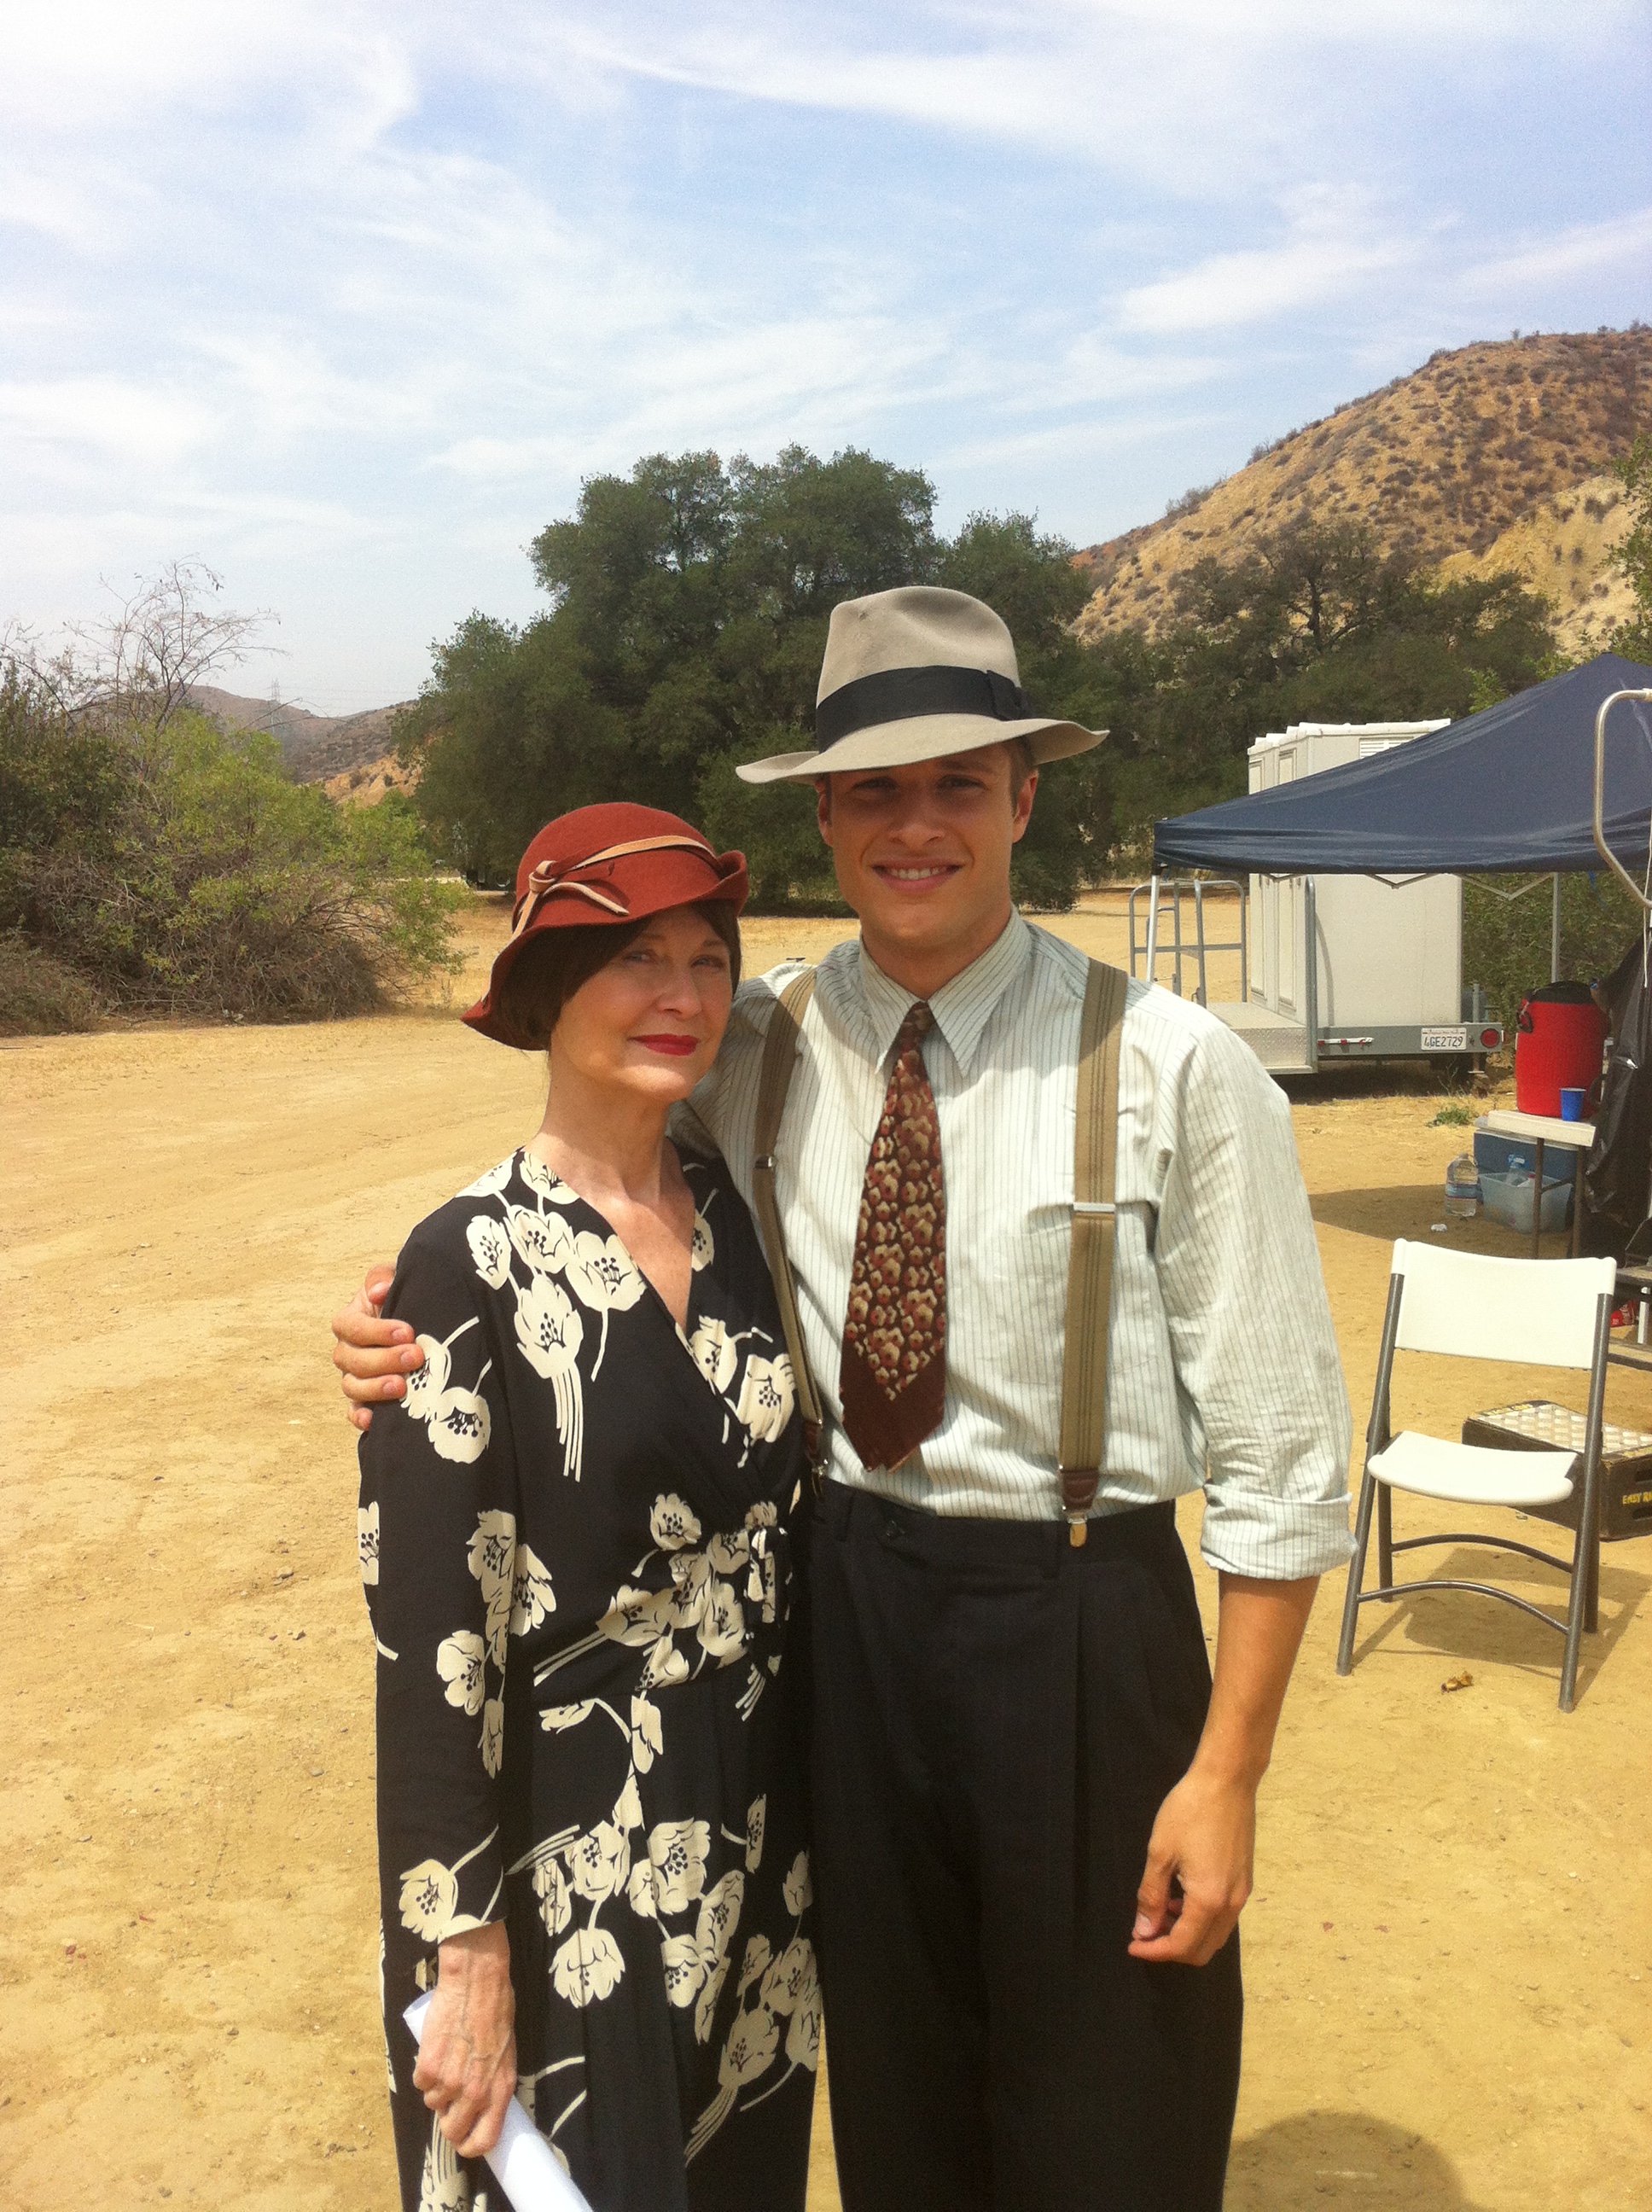 Dee Wallis and Jim Poole on set of Bonnie and Clyde.